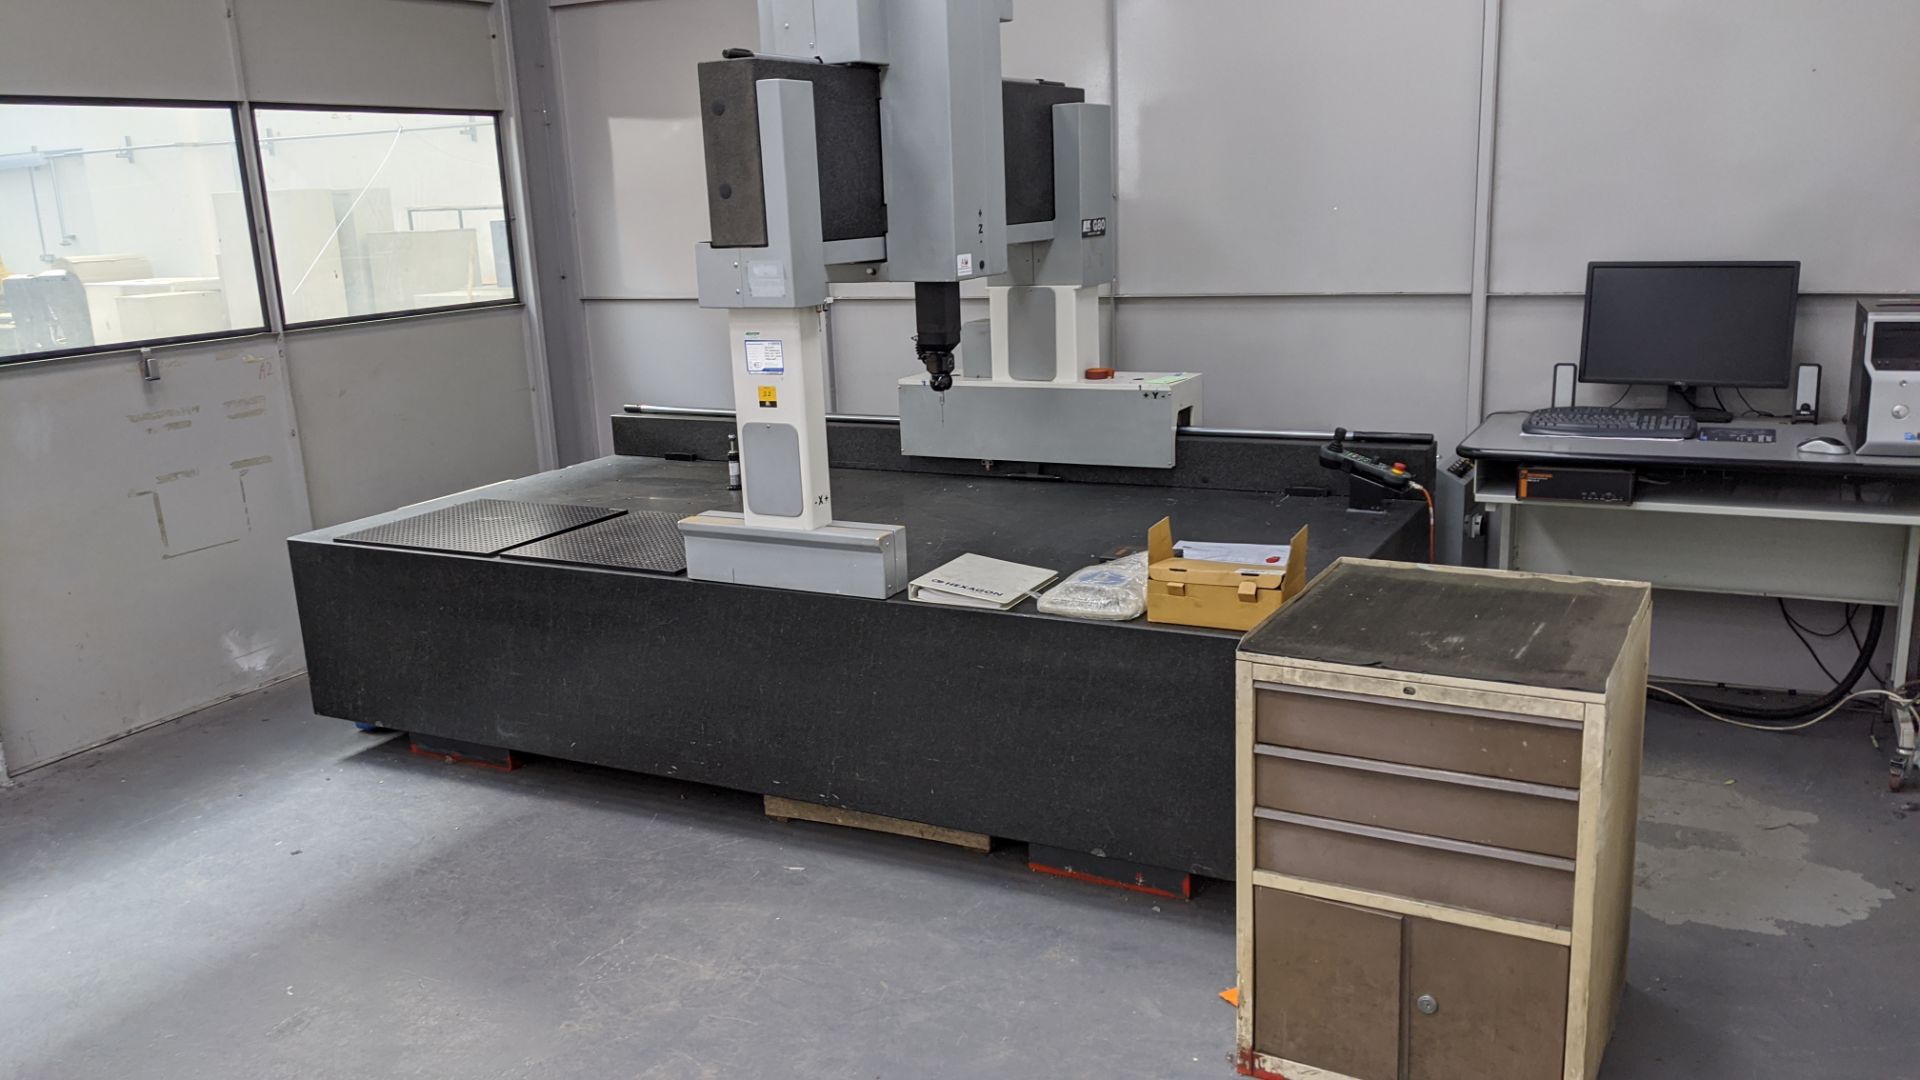 LK Microvector CMM model G80 with Renishaw model PH10T probe on granite table measuring approx. - Image 21 of 28